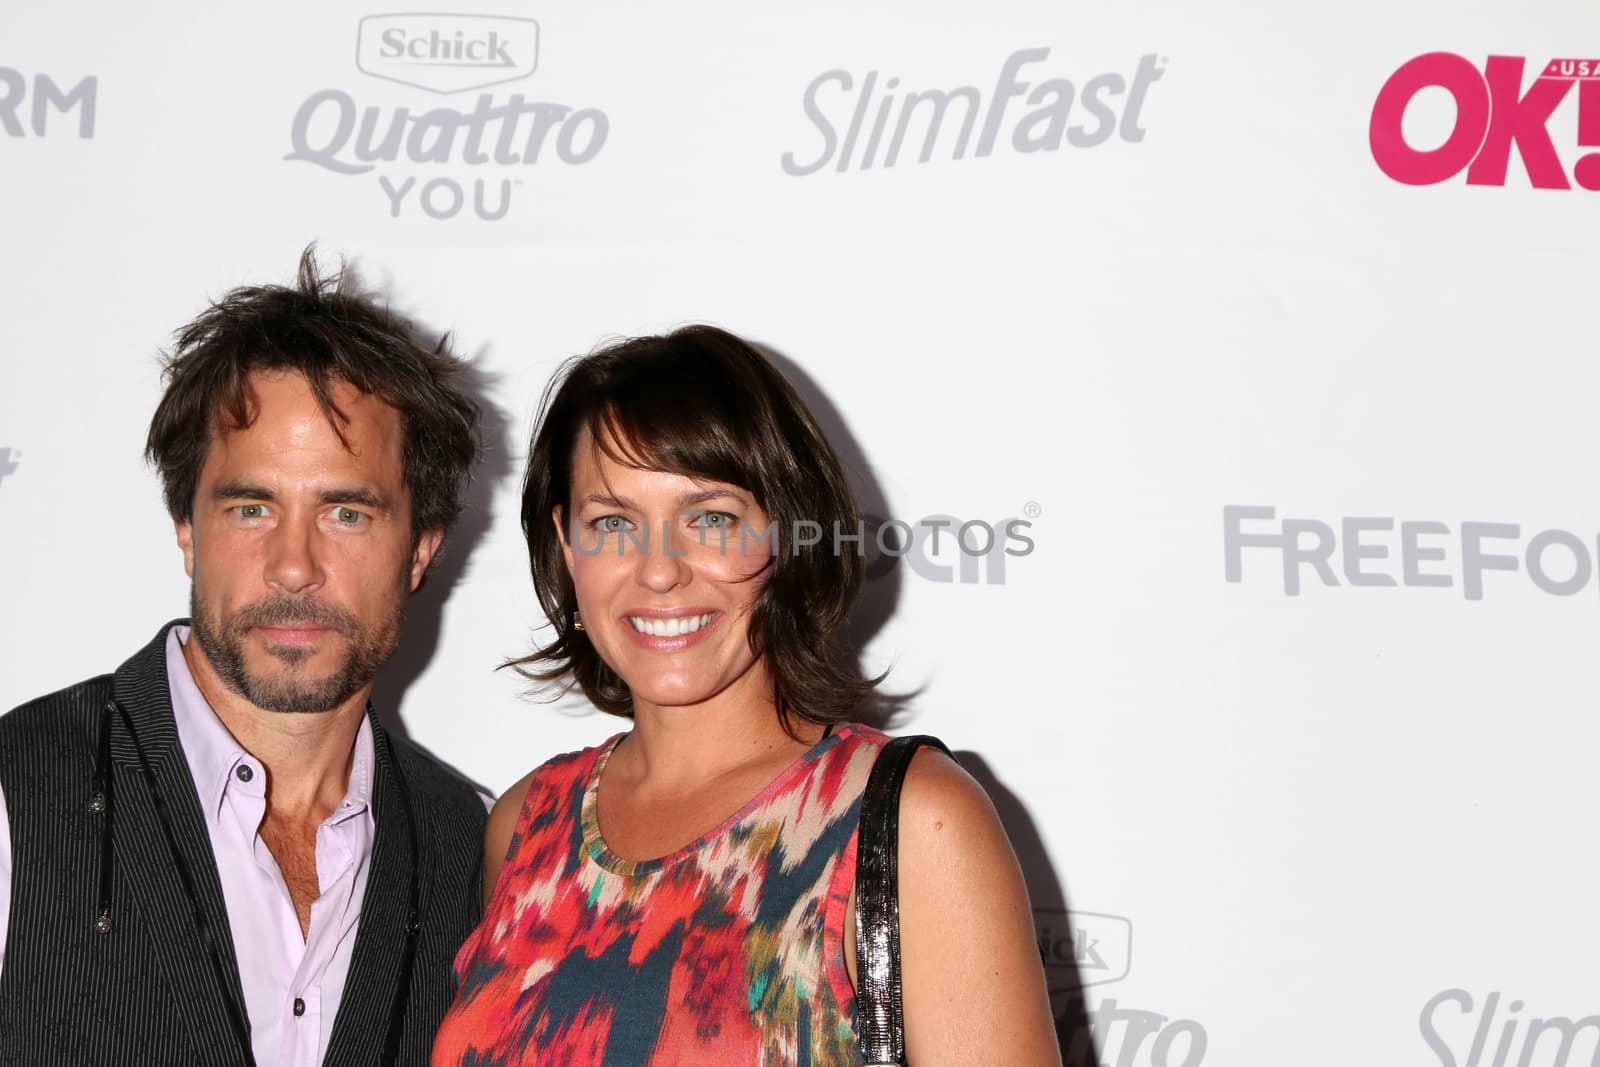 Shawn Christian, Arianne Zucker
at the OK! Magazine Summer Kick-Off Party, W Hollywood Hotel, Hollywood, CA 05-17-17